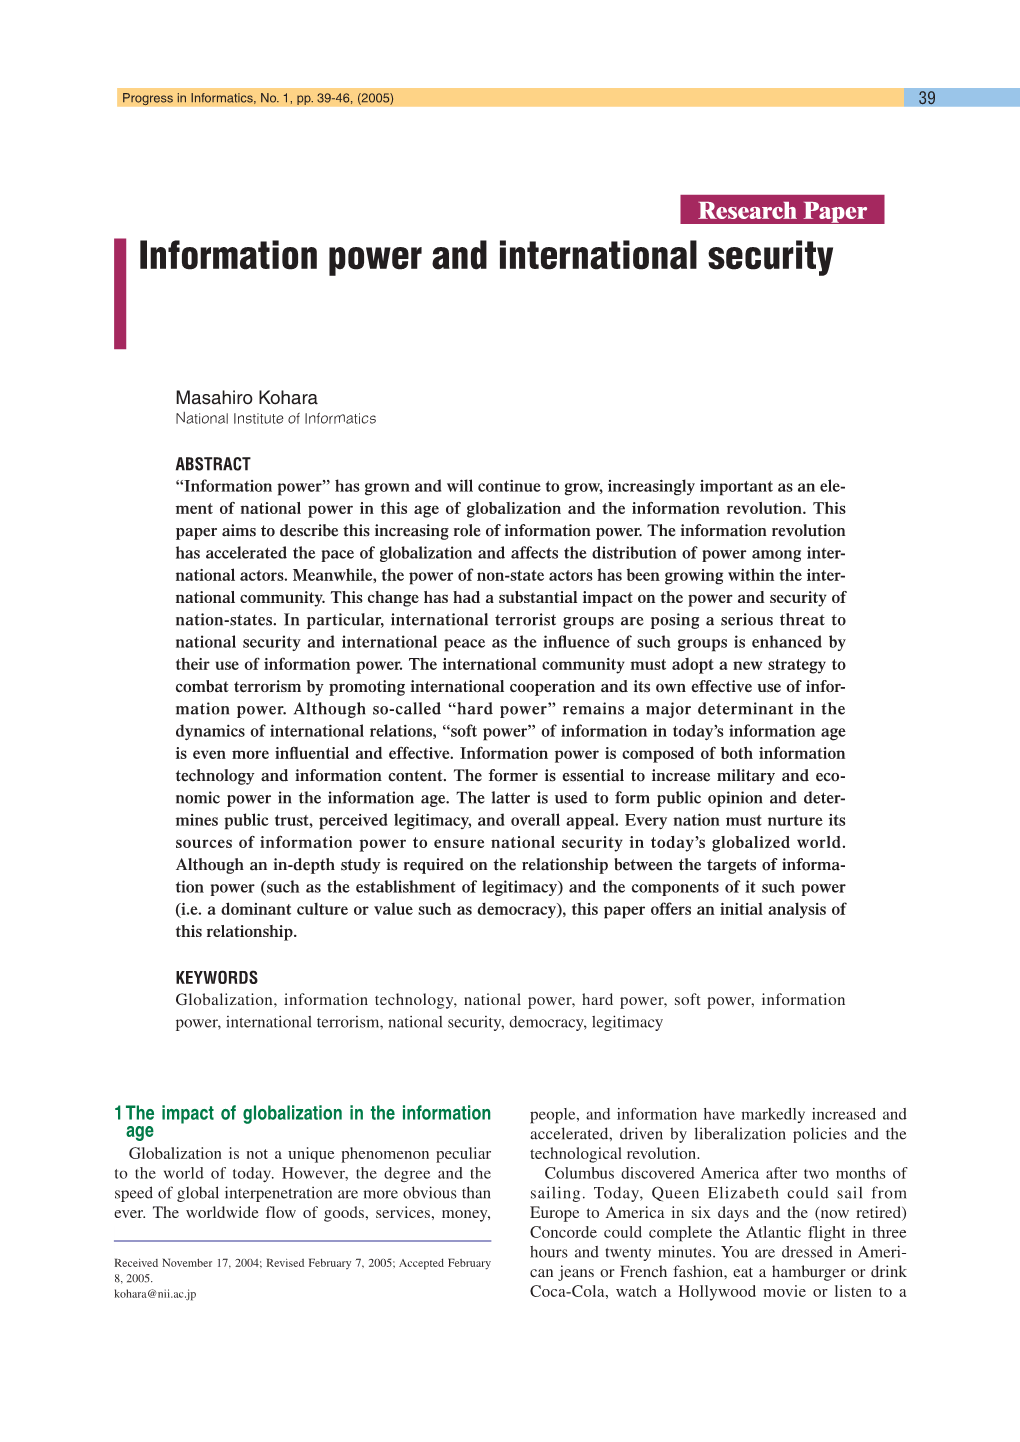 Information Power and International Security